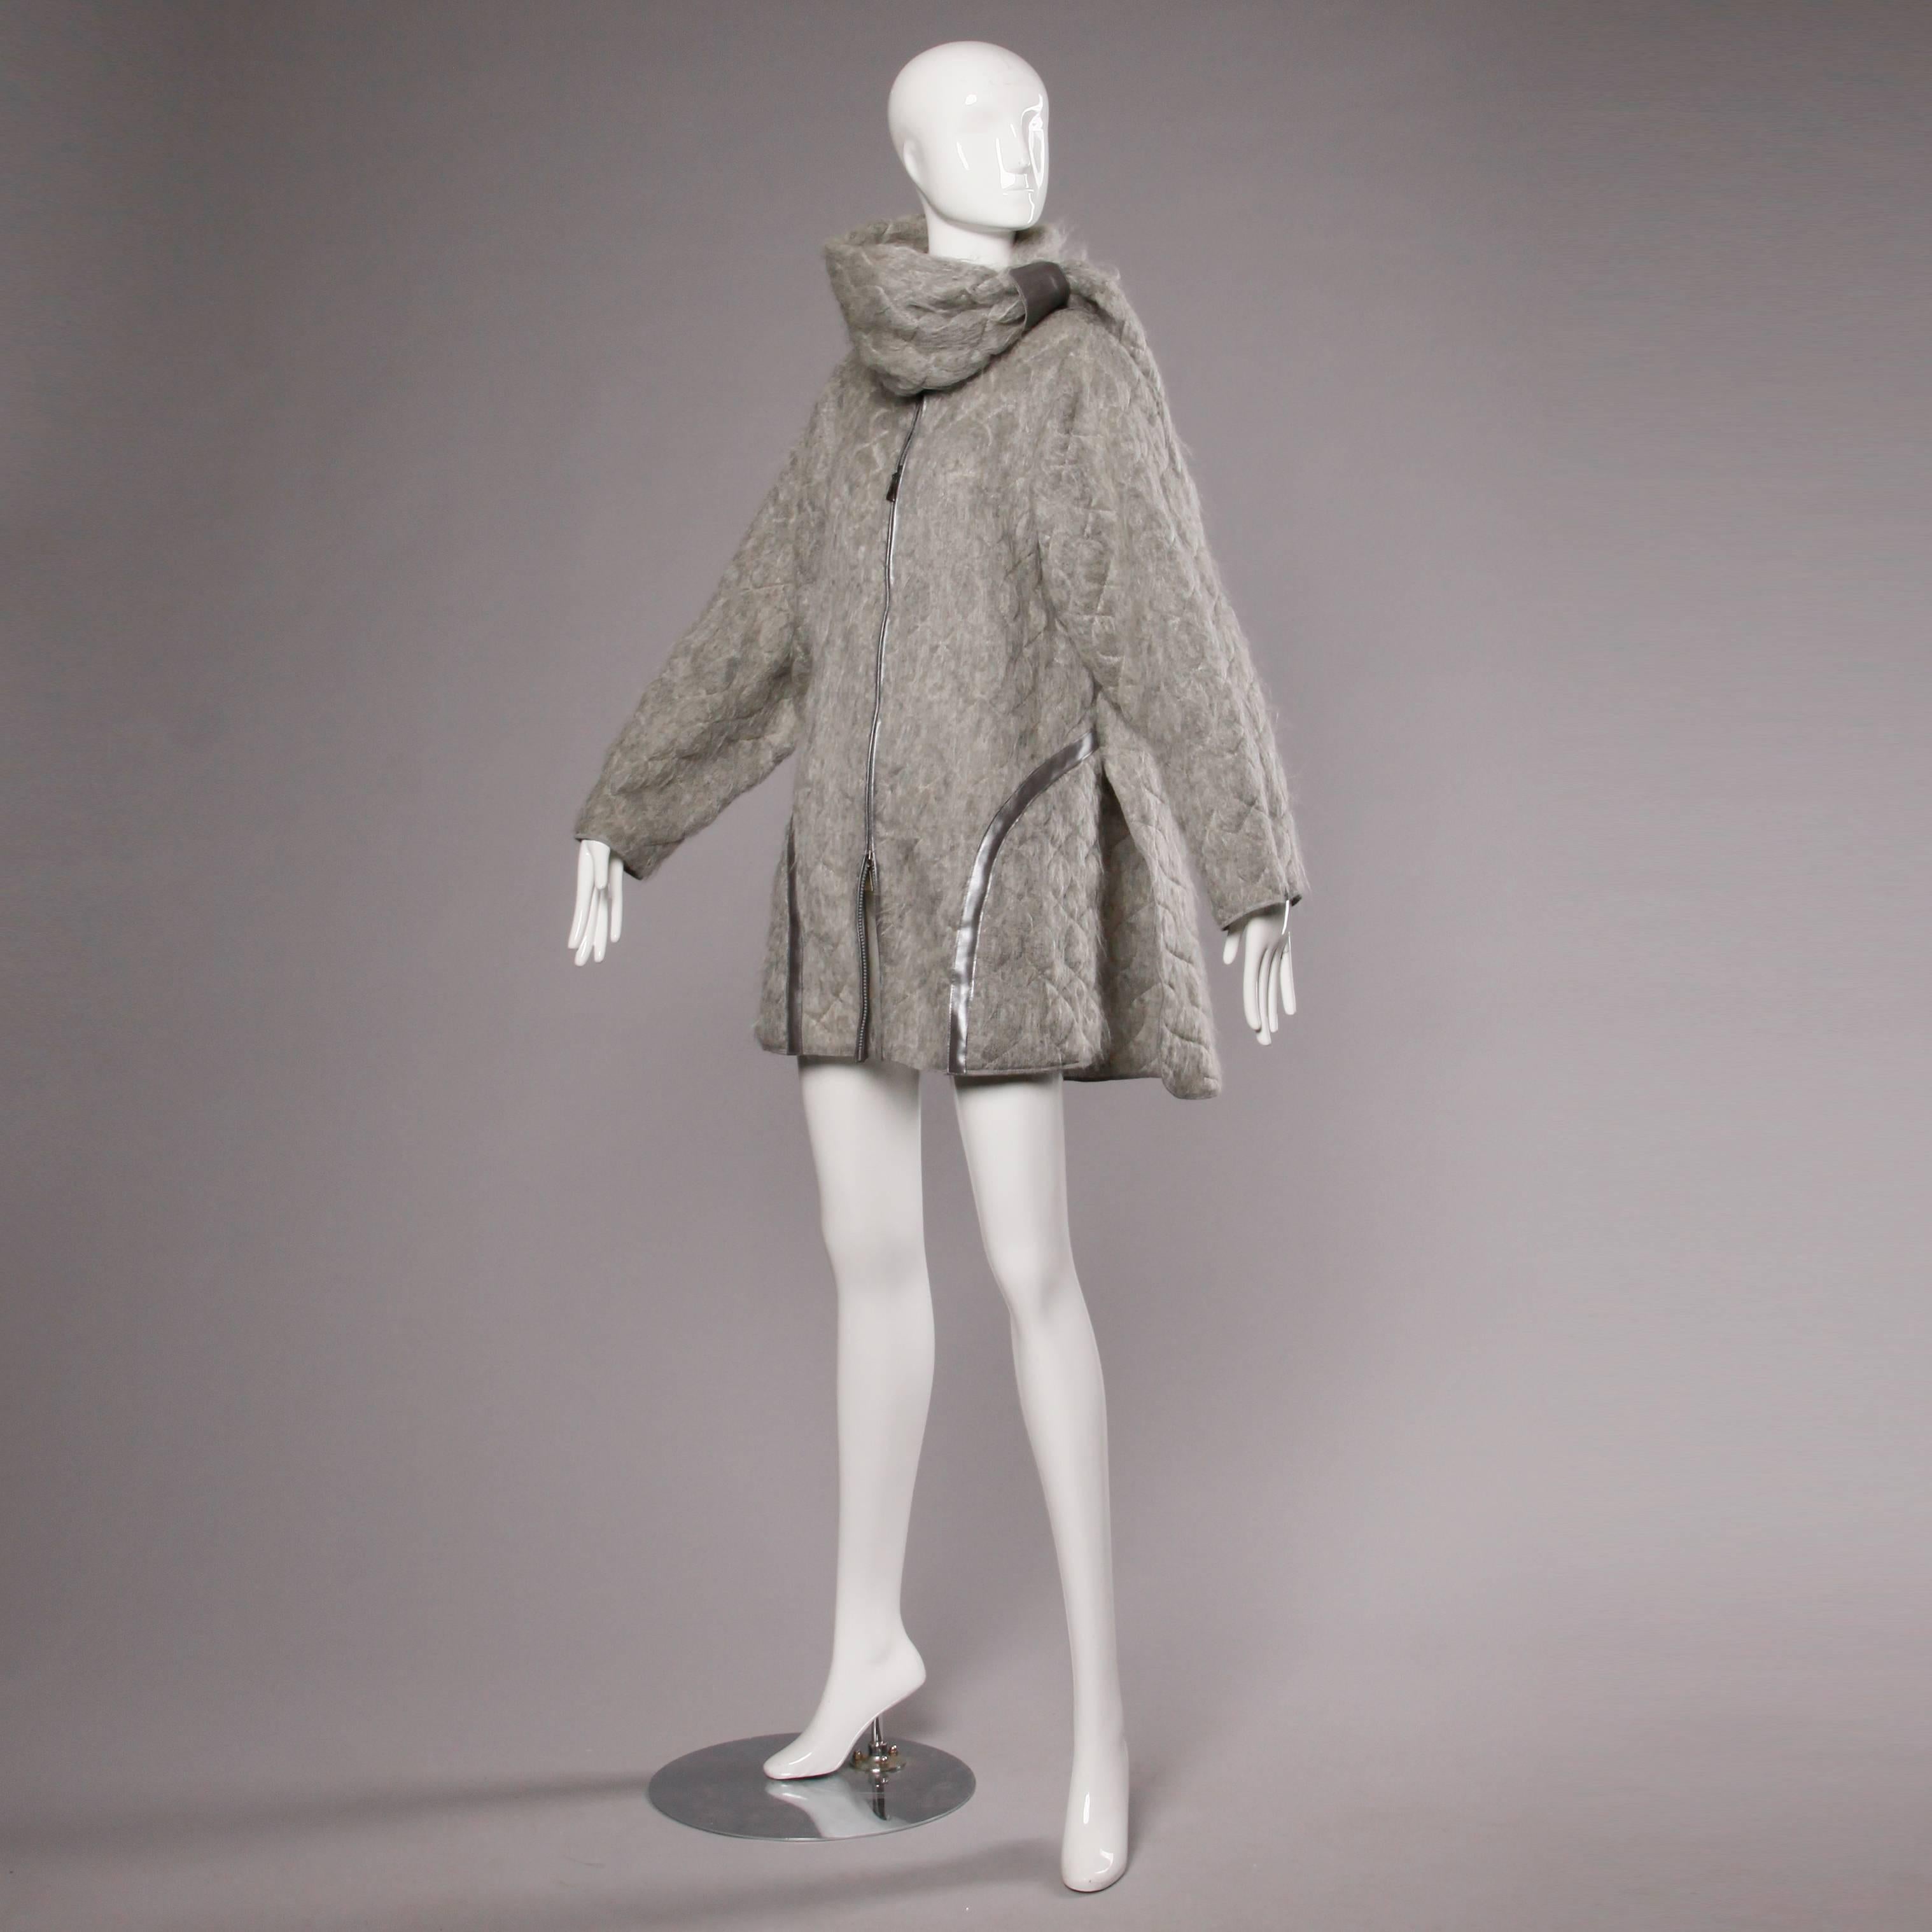 Amazing vintage oversized cocoon coat by Claude Montana with an asymmetric attached scarf. Unlined. Front two way zip closure. Silver leather trim. 70% mohair 30% wool. Marked size 44. Estimated size free. The measurements are as follows:

Bust: